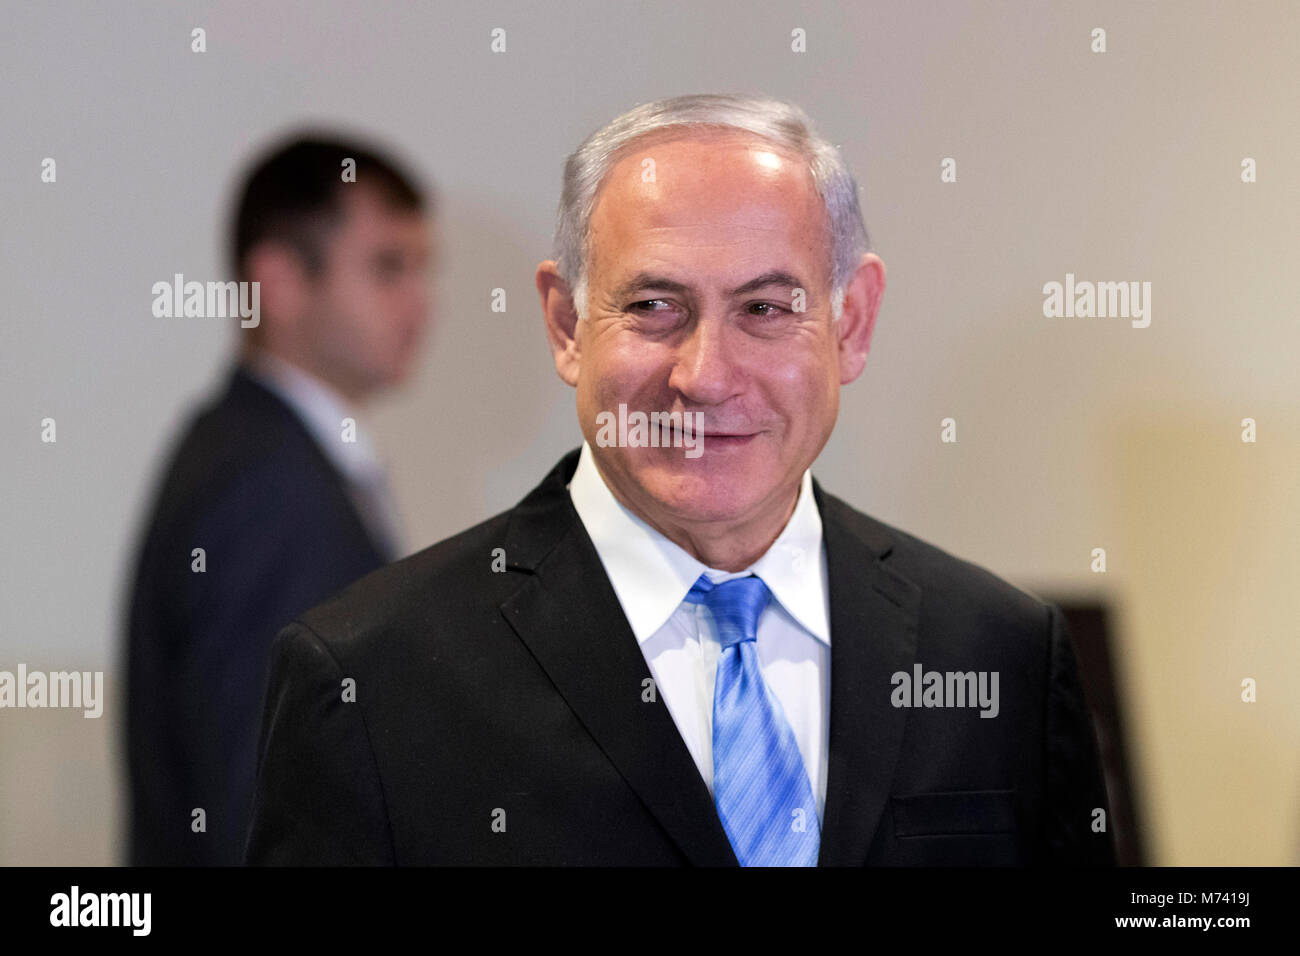 (180308) -- UNITED NATIONS, March 8, 2018 (Xinhua) -- Israeli Prime Minister Benjamin Netanyahu (R) attends the exhibition '3000 years of history: Jews in Jerusalem' at the United Nations headquarters in New York, March 8, 2018. (Xinhua/Li Muzi) Stock Photo